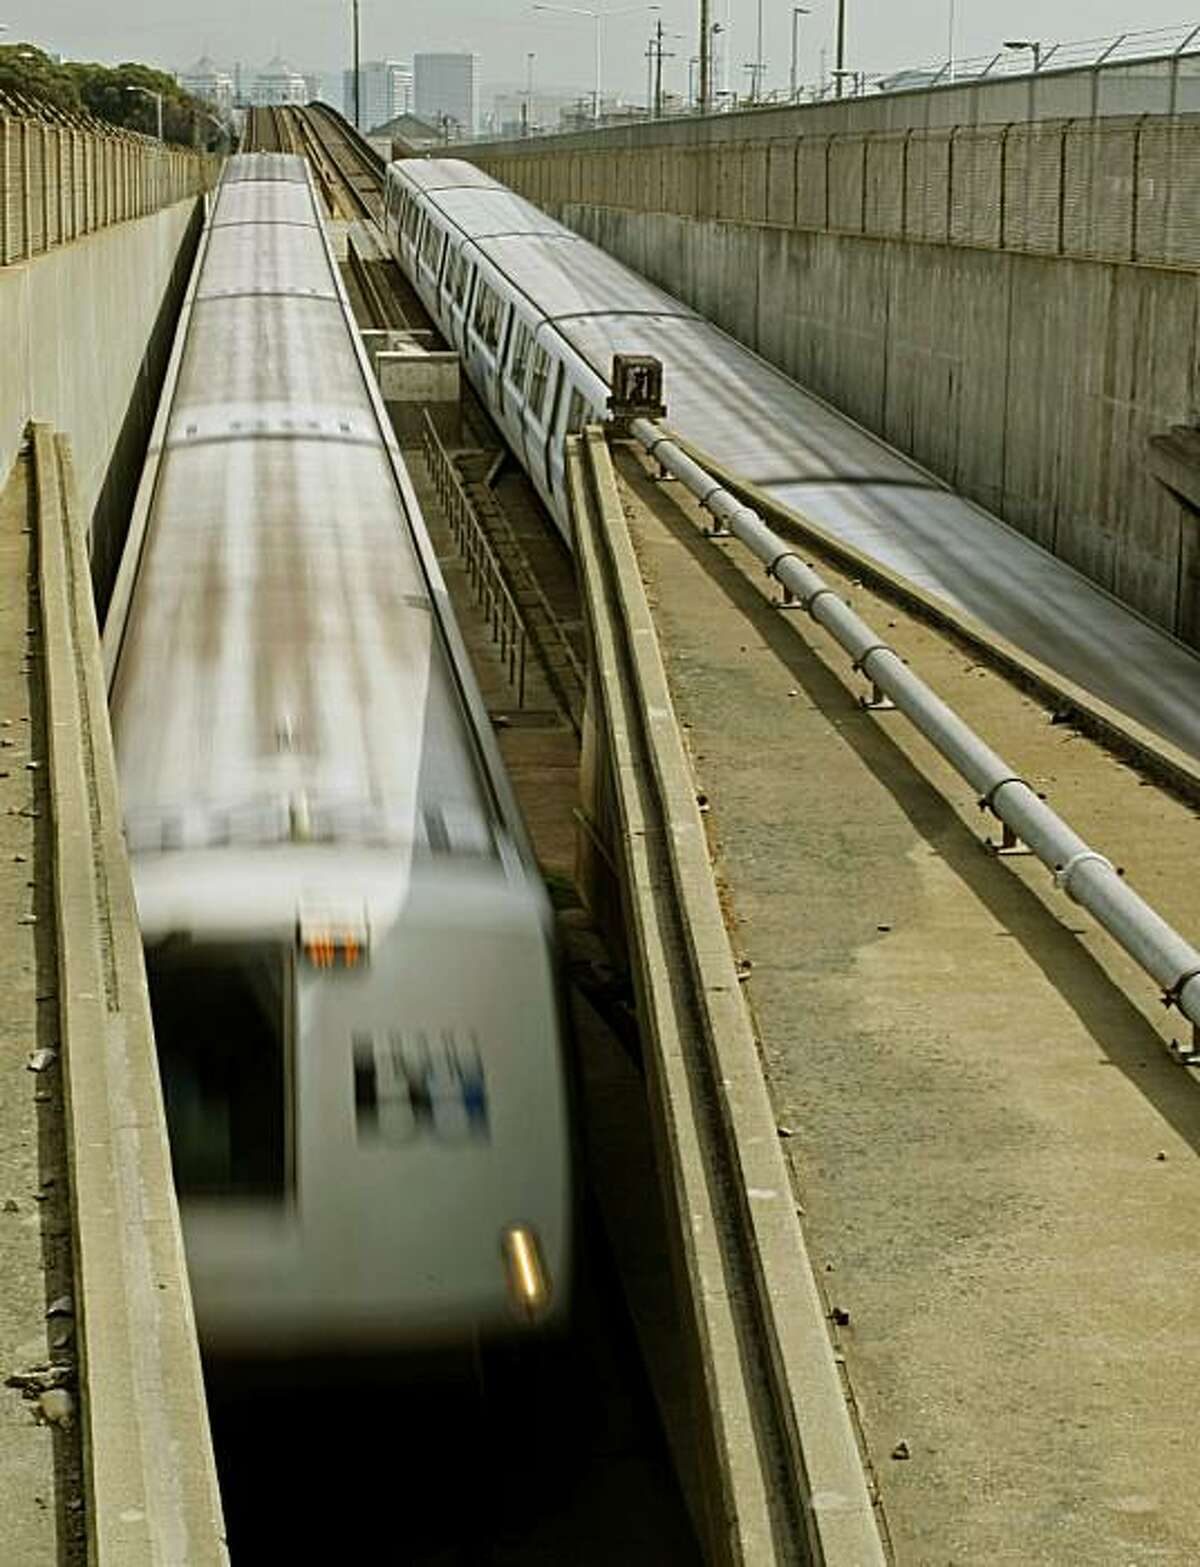 BART trains move into and out of the West Portal tunnel in West Oakland, Calif., on Mar. 7, 2008. State bond money will be used to earthquake retrofit the BART tube that carries thousands of passengers each day into and out of San Francisco, Calif., under San Francisco Bay. Photo by Michael Macor/ San Francisco Chronicle